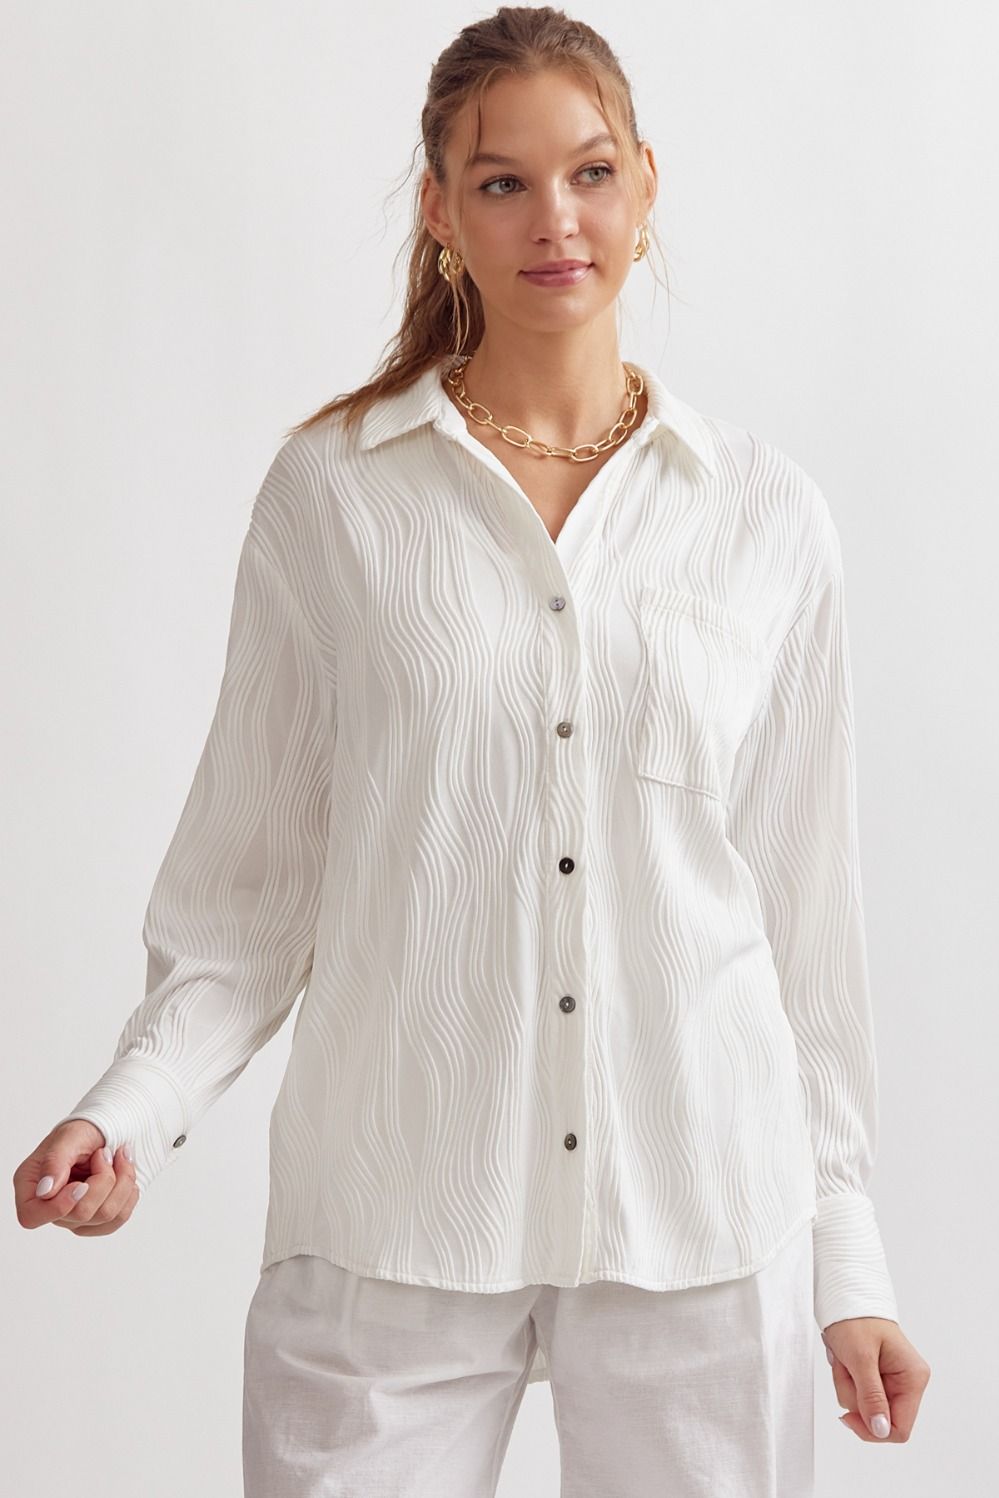 Caroline Long Sleeve Wave Textured Button Up Blouse - White